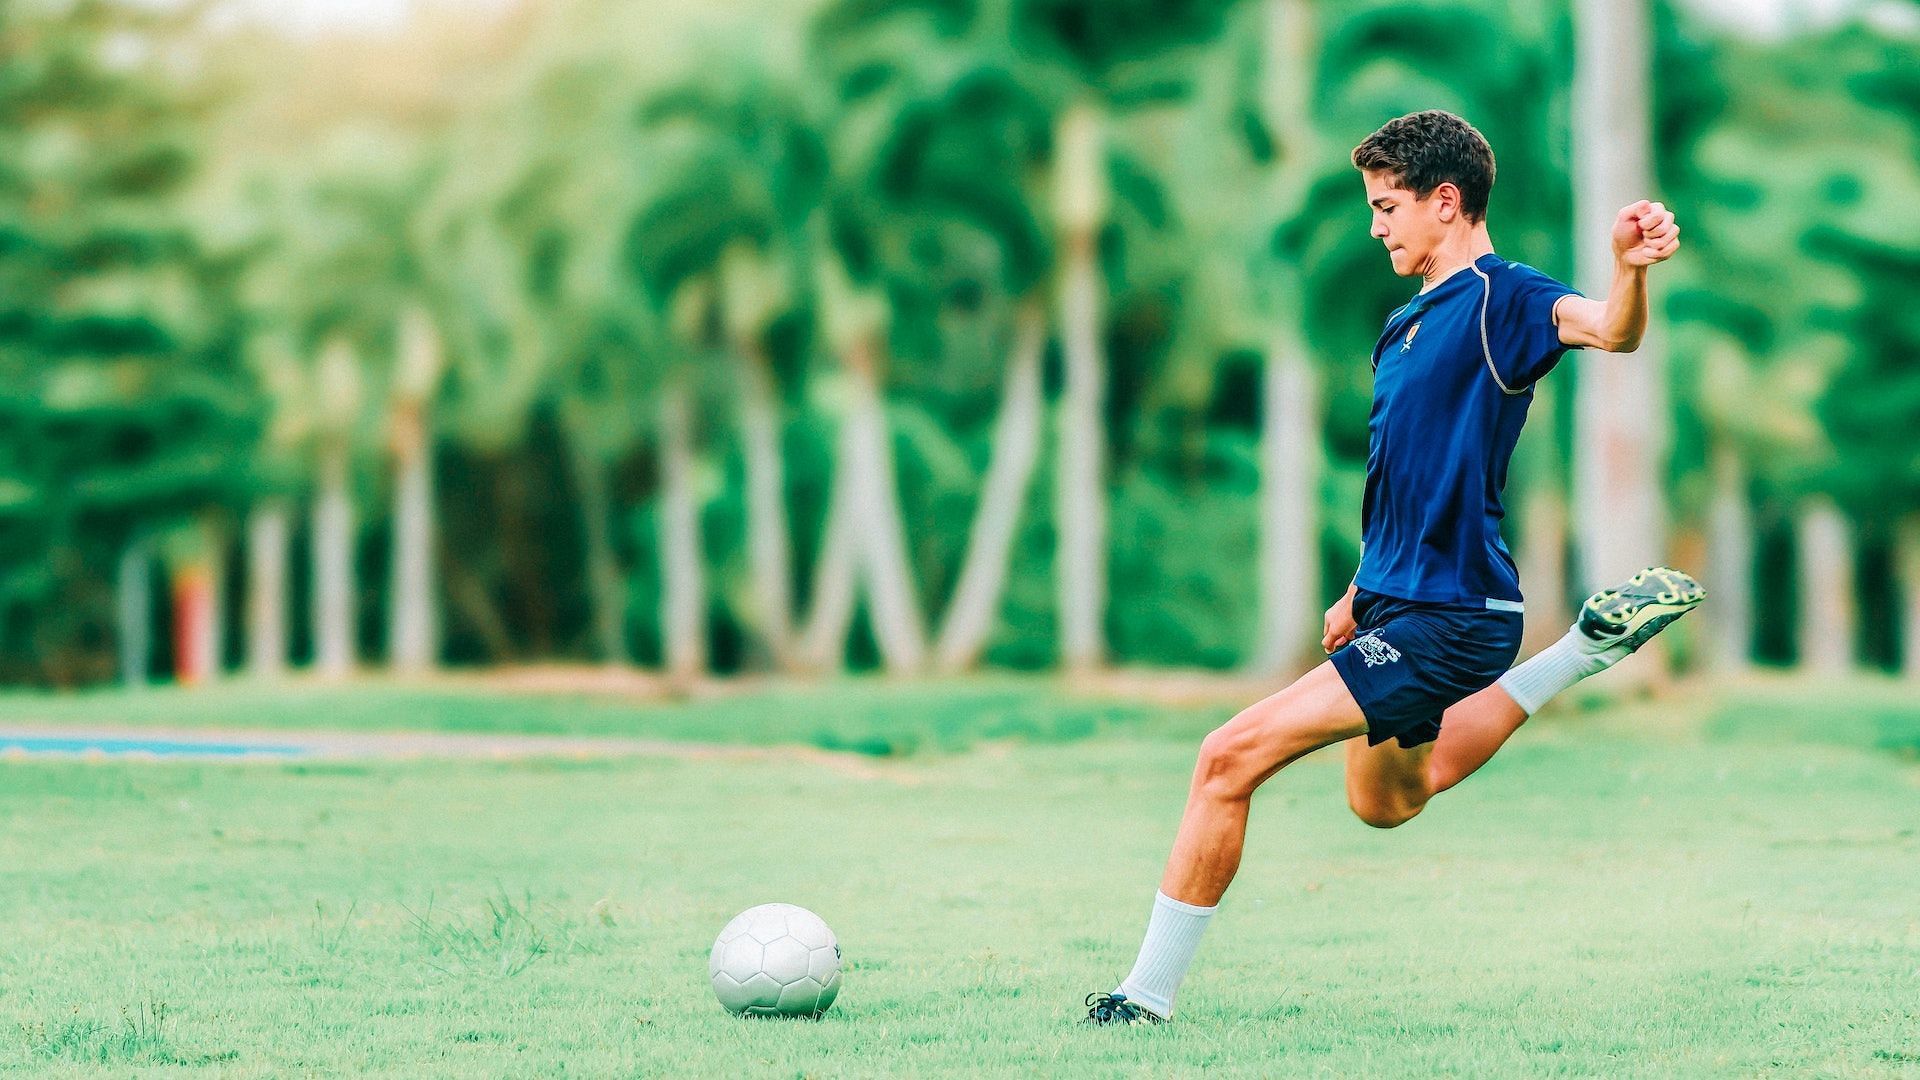 Exercises can help you become a better soccer player. (Image via Unsplash/ Kobby Mendez)